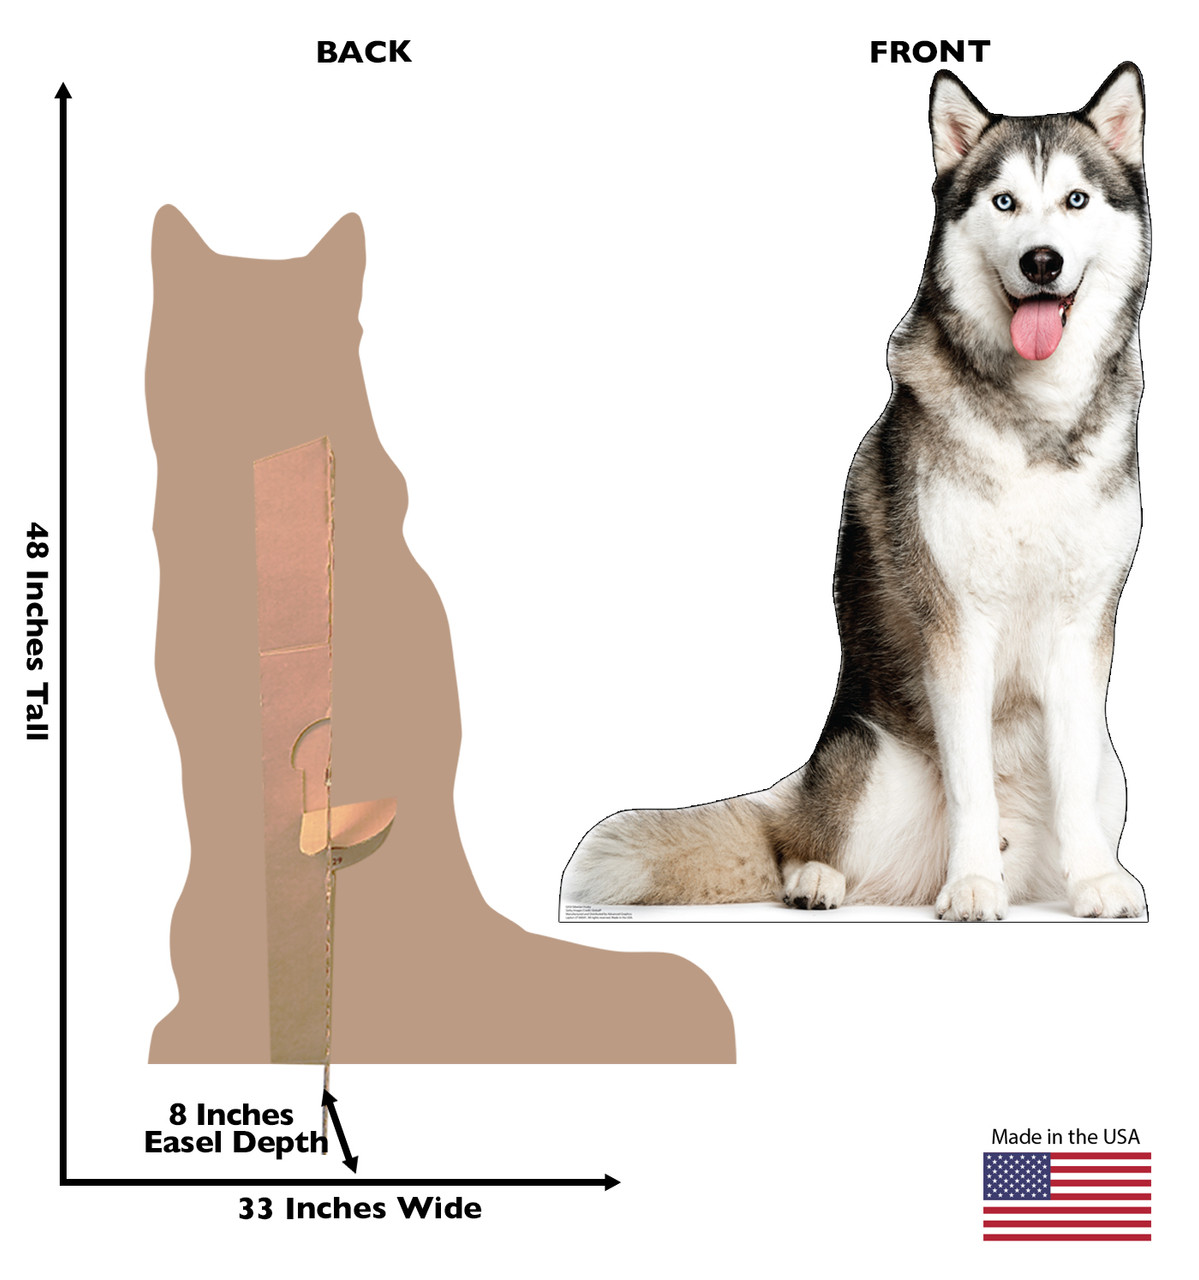 Life-size cardboard standee of a Siberian Husky with back and front dimensions.